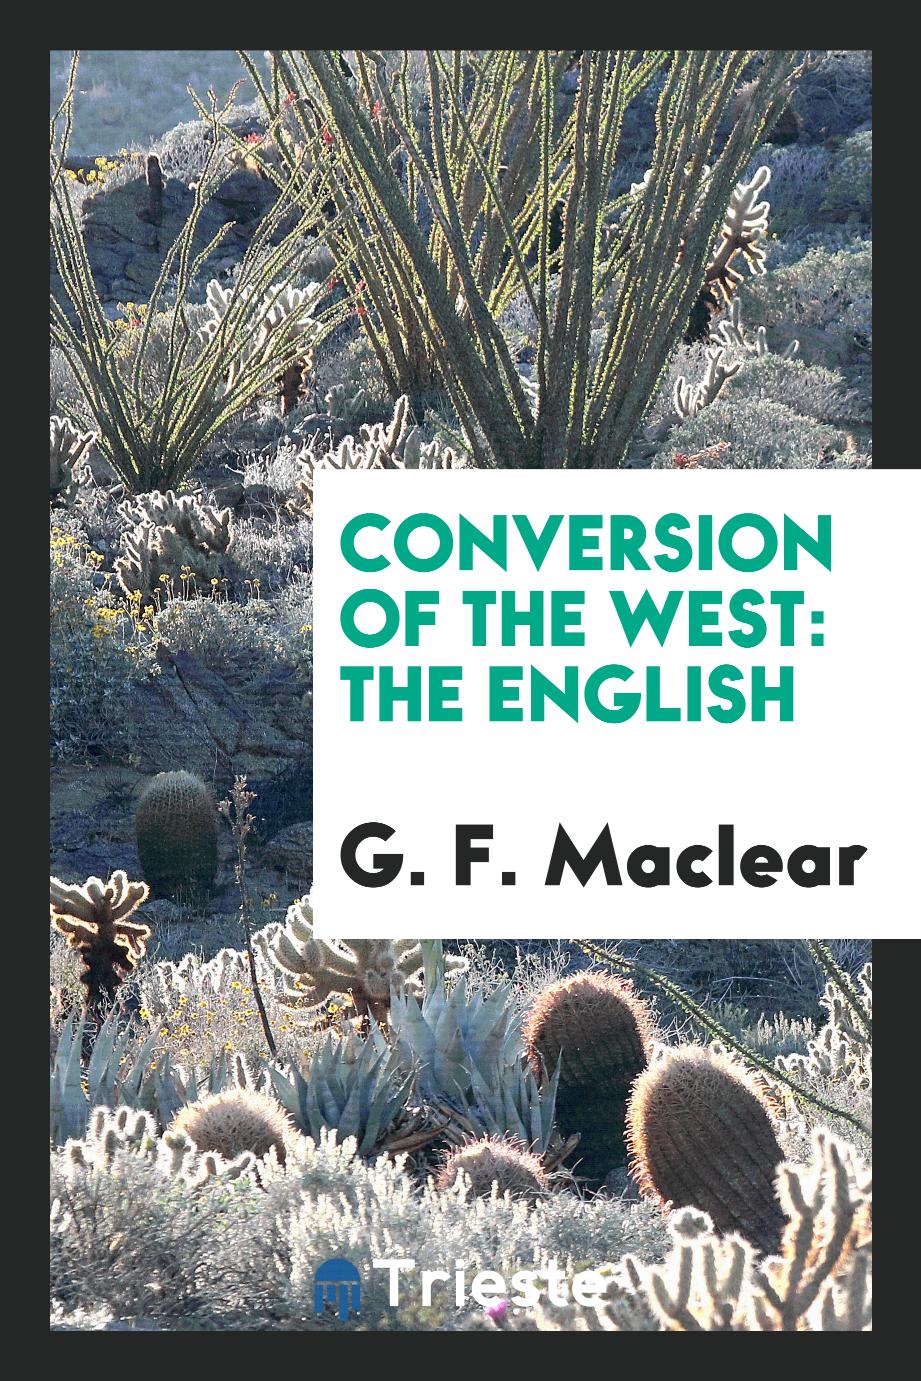 Conversion of the West: the English